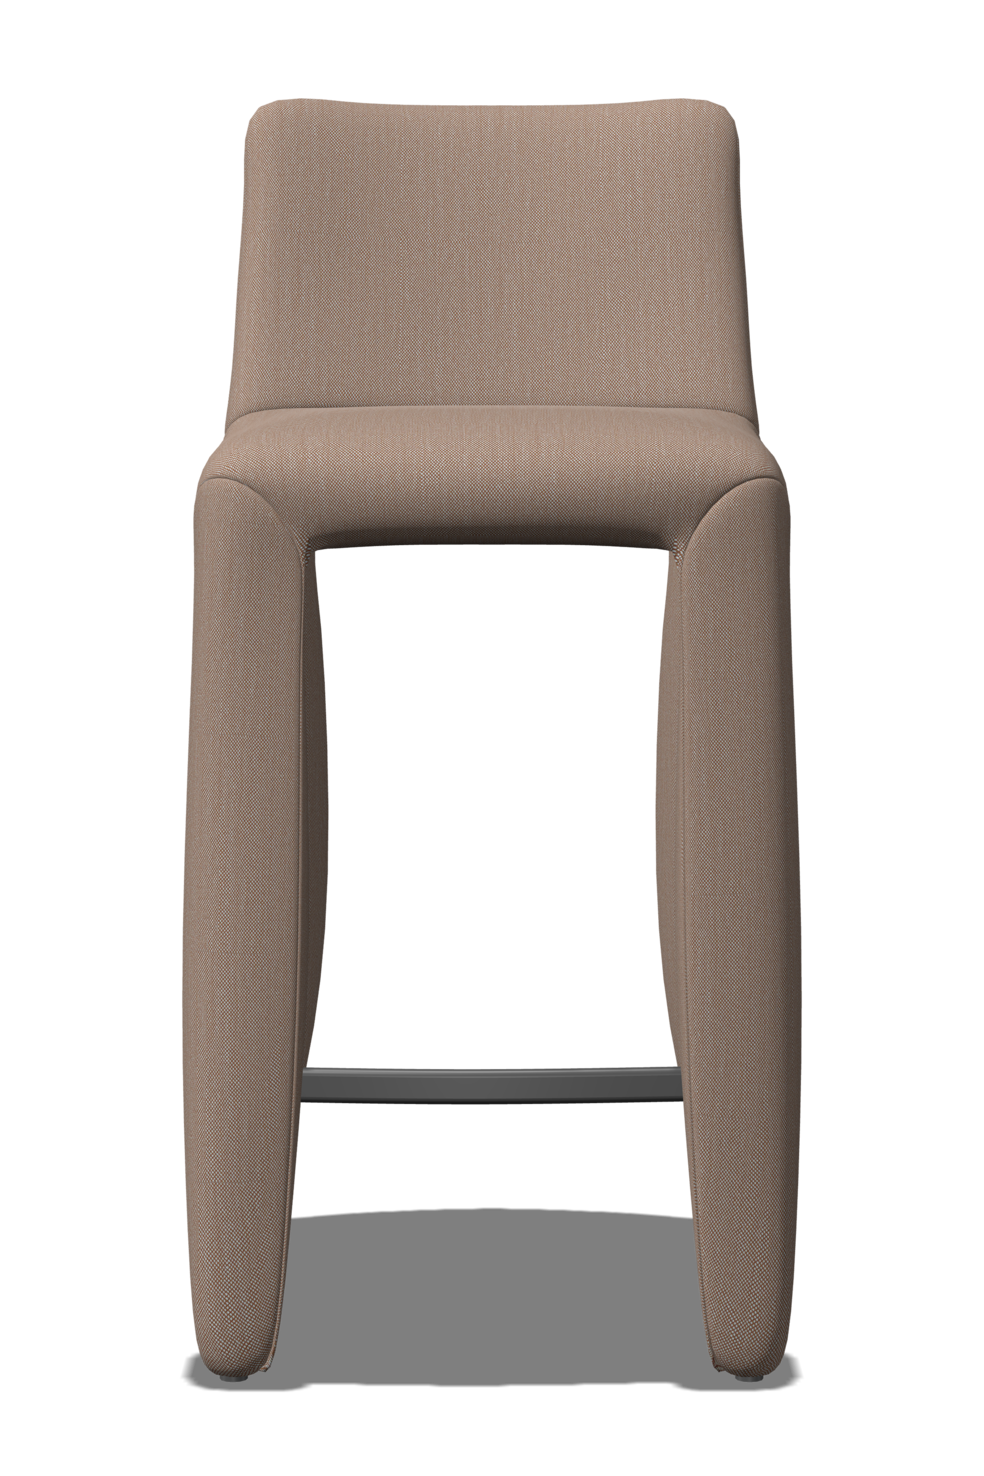 Monster Barstool low no stitching multicolour